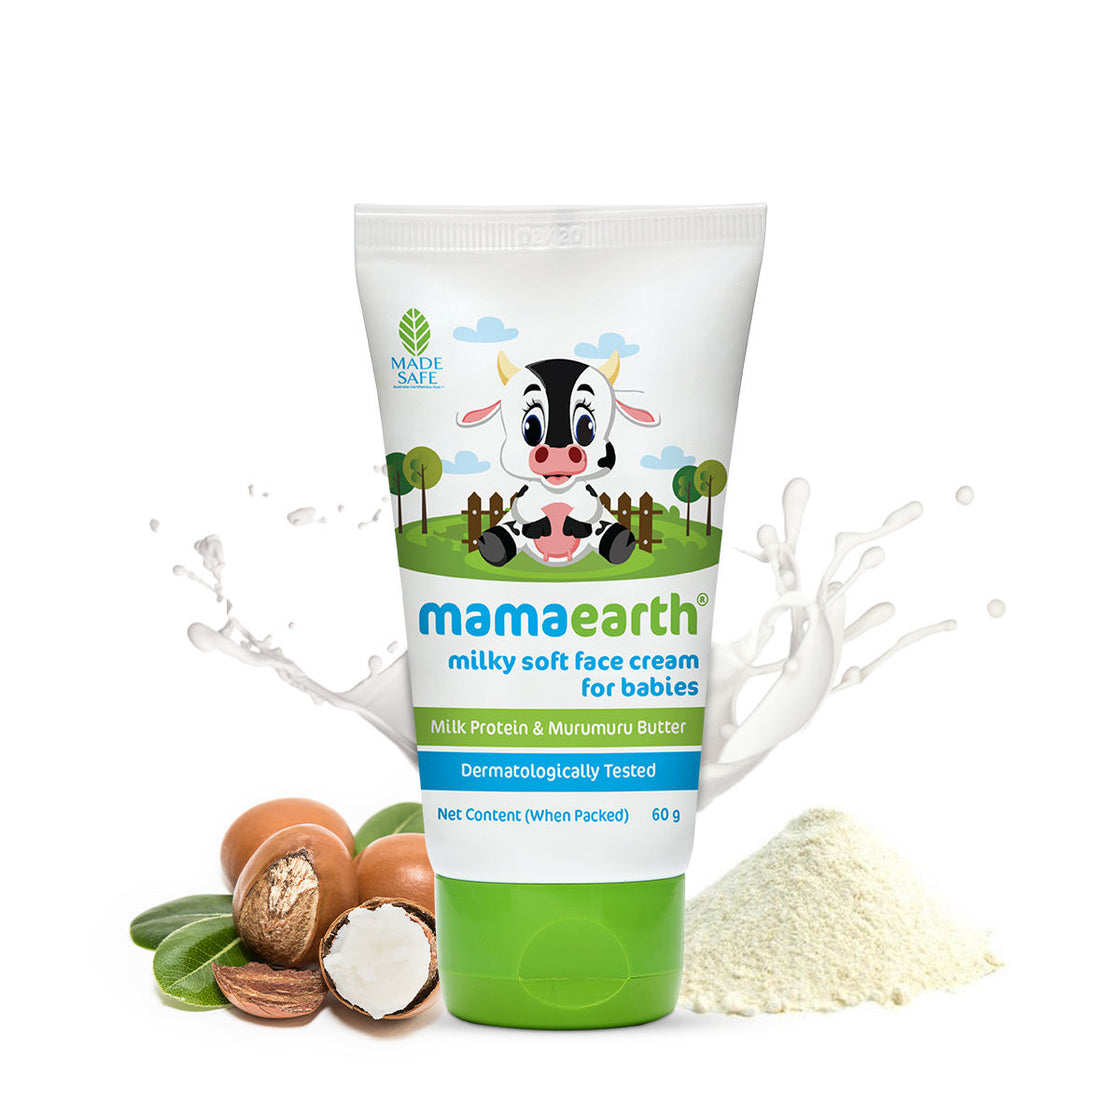 Mamaearth Milky Soft Face Cream For Babies With Milk Protein Murumuru Butter